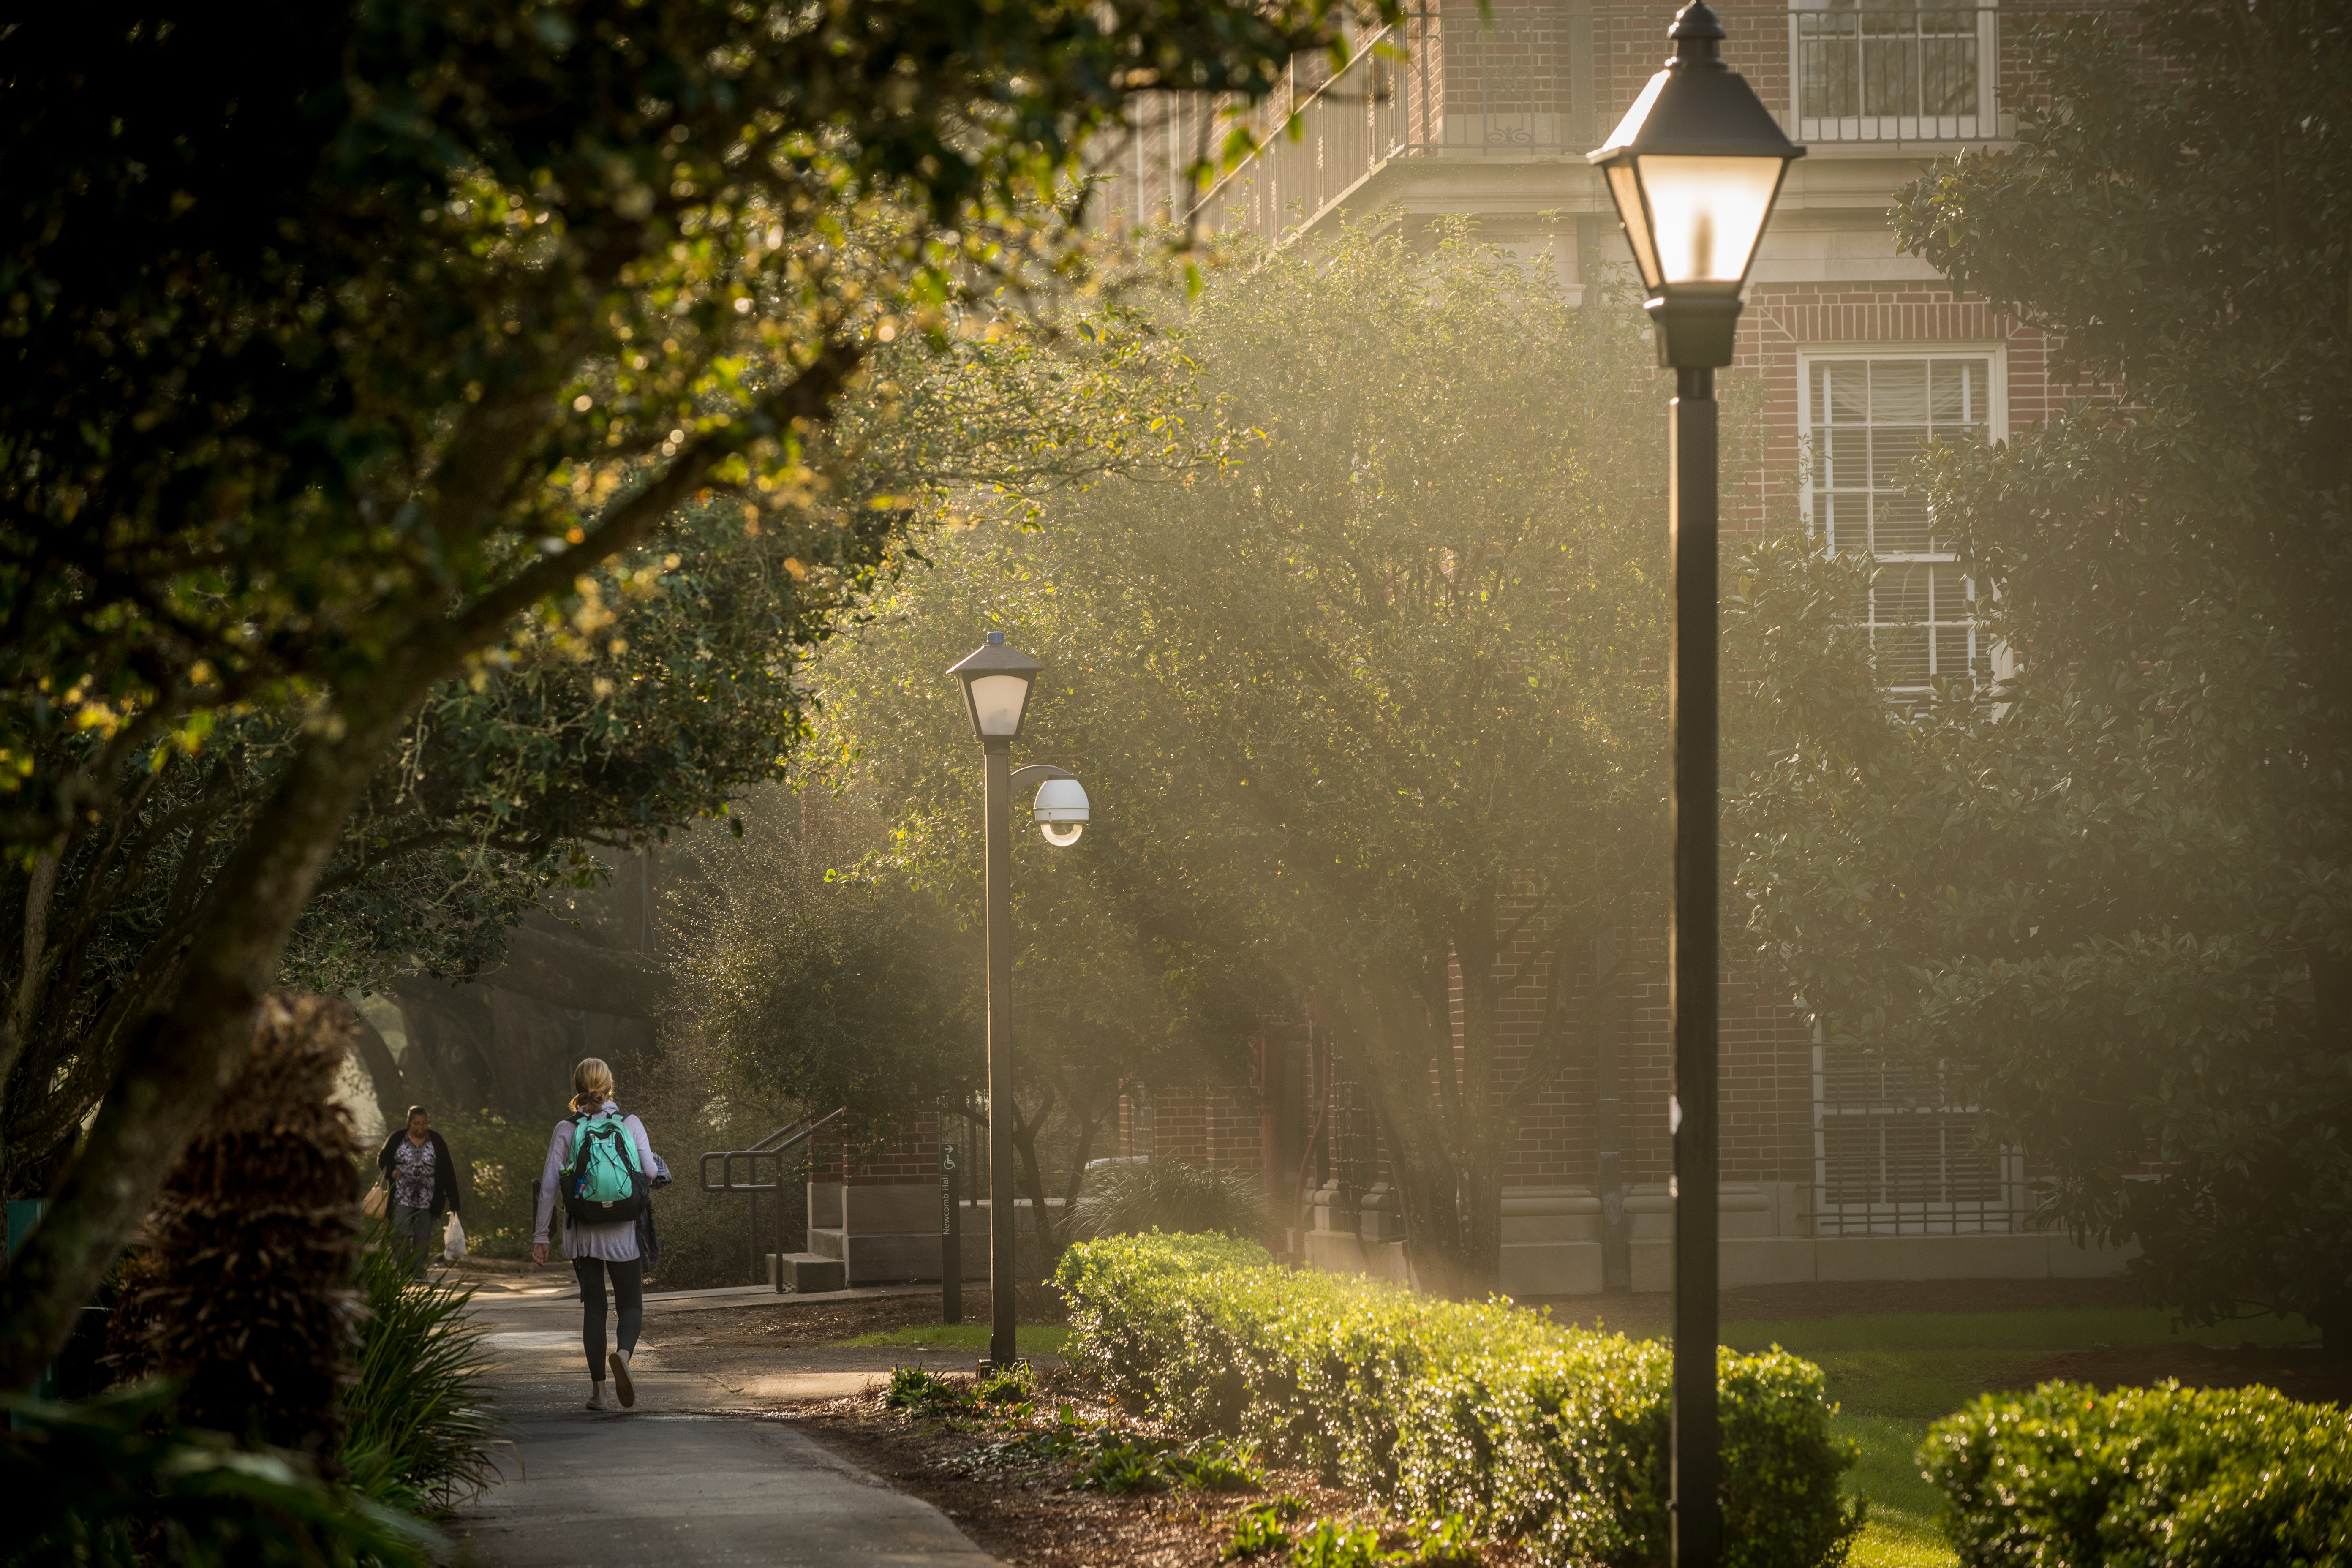 A student walks down a lighted path